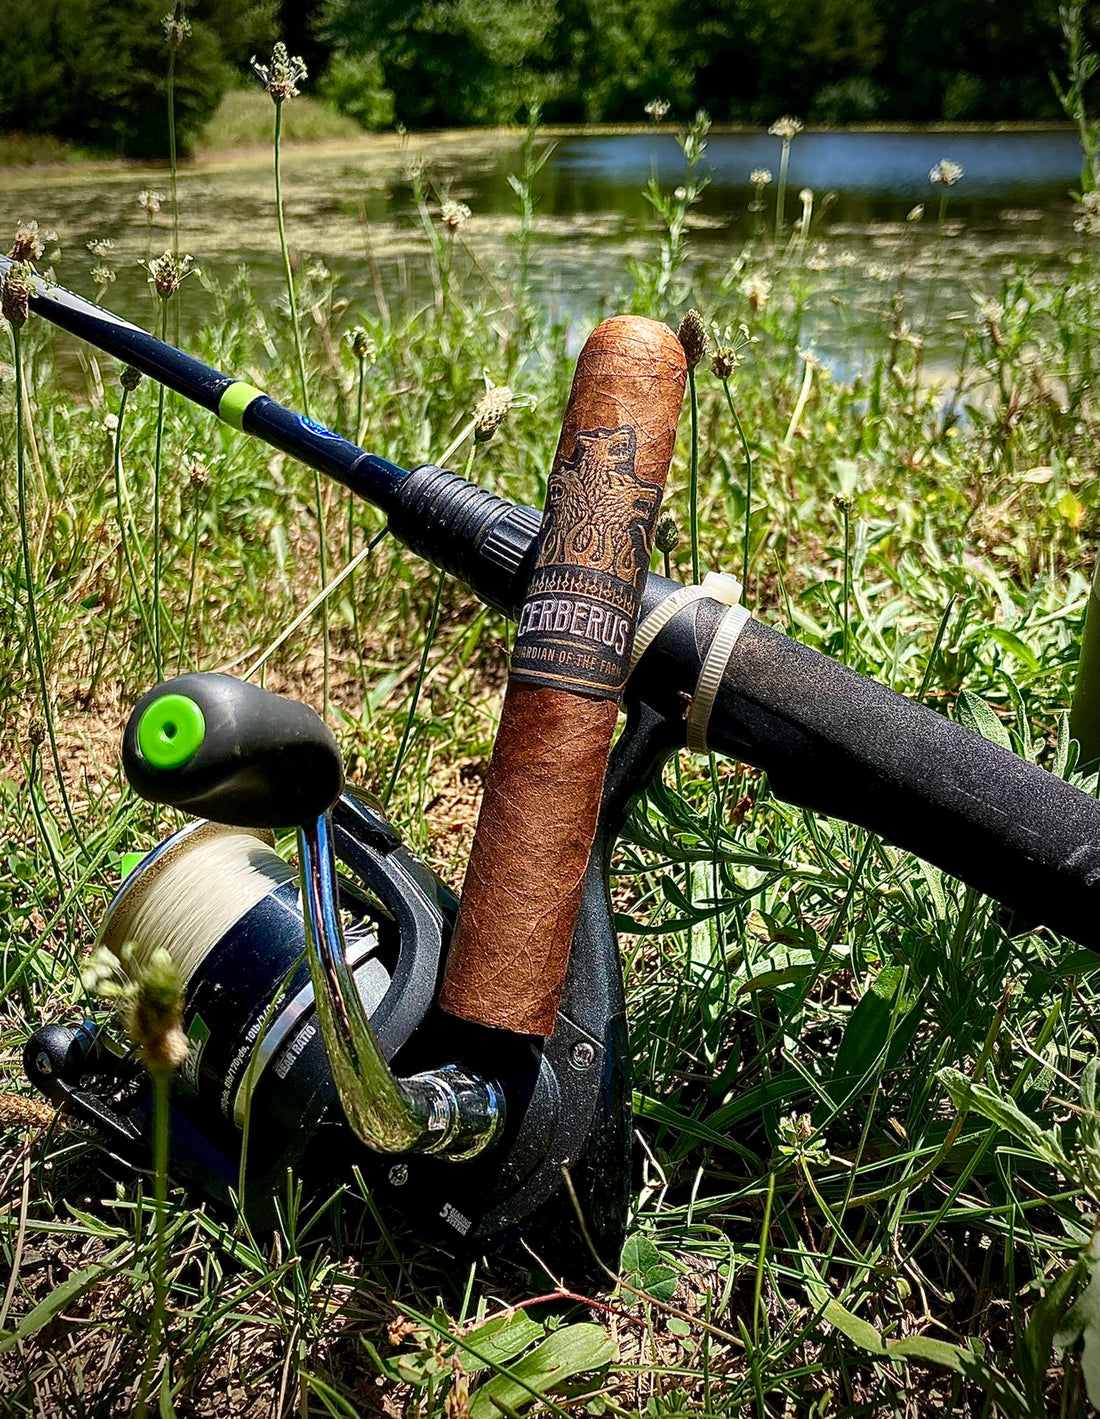 Pond Fishing Sessions: Aganorsa Leaf Guardian of the Farm Cerberus Gran Robusto